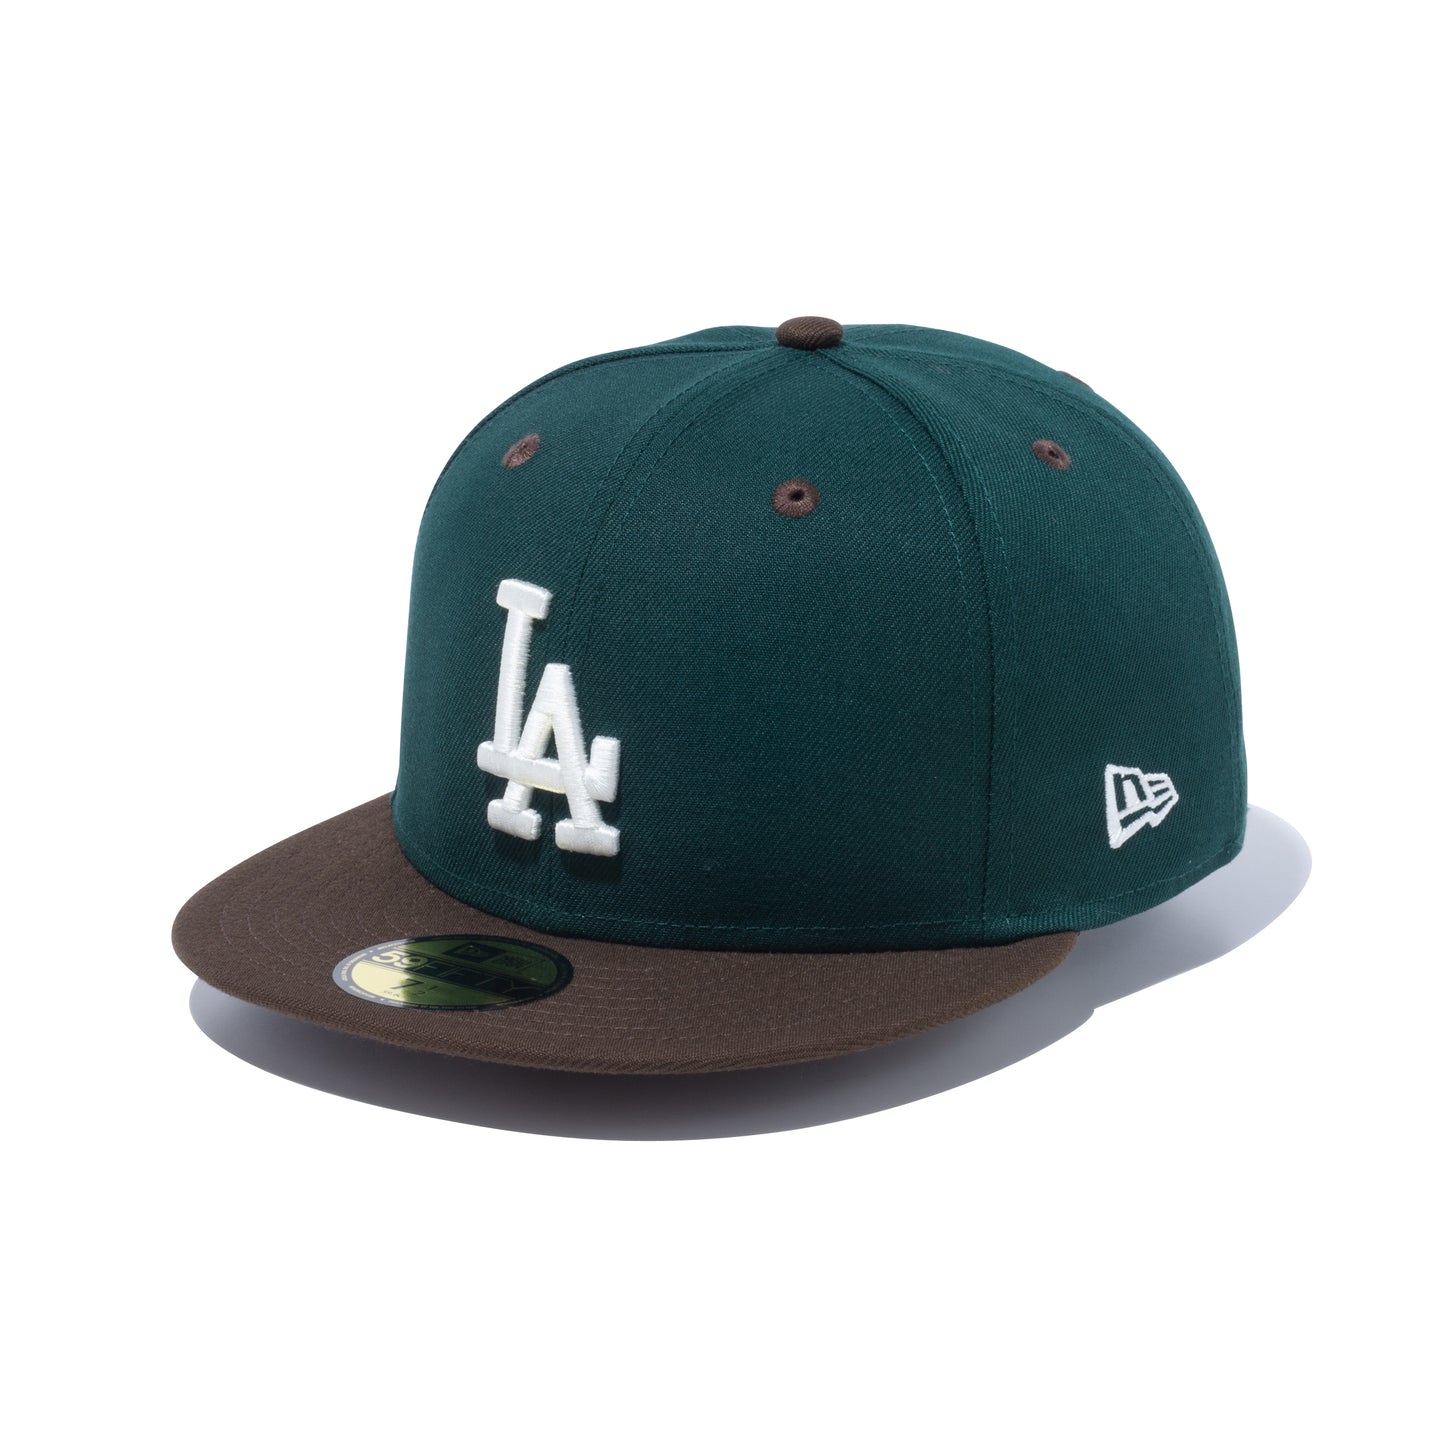 LOS ANGELES DODGERS 59FIFTY "BEEF AND BROCCORLI"